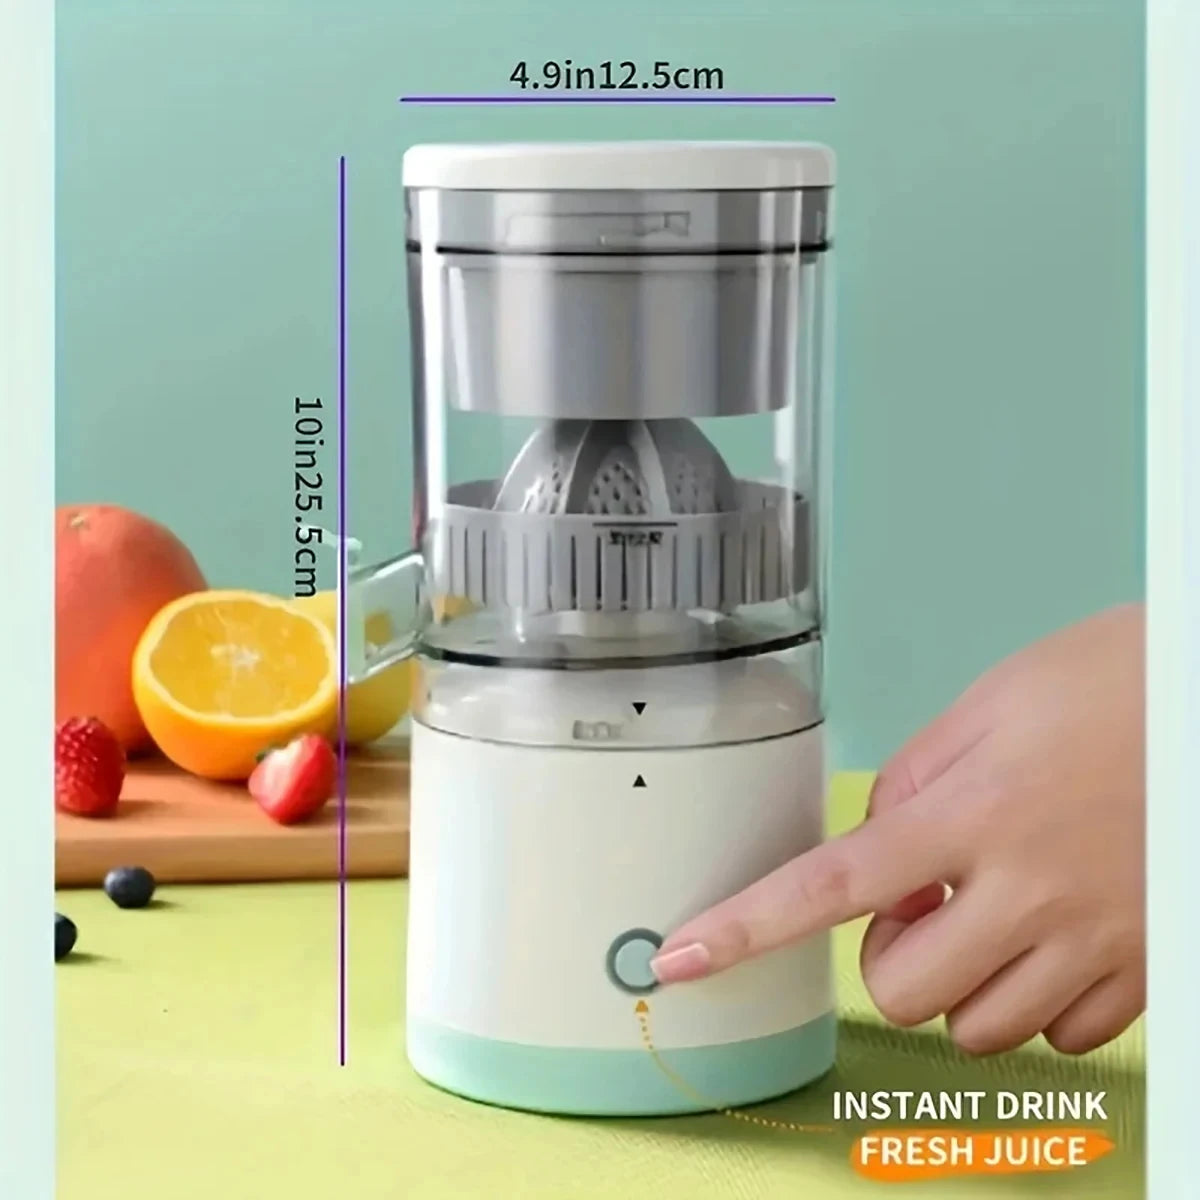 The electric citrus juicer with USB connection offers efficient juicing with easy connectivity. Compact, sleek design.